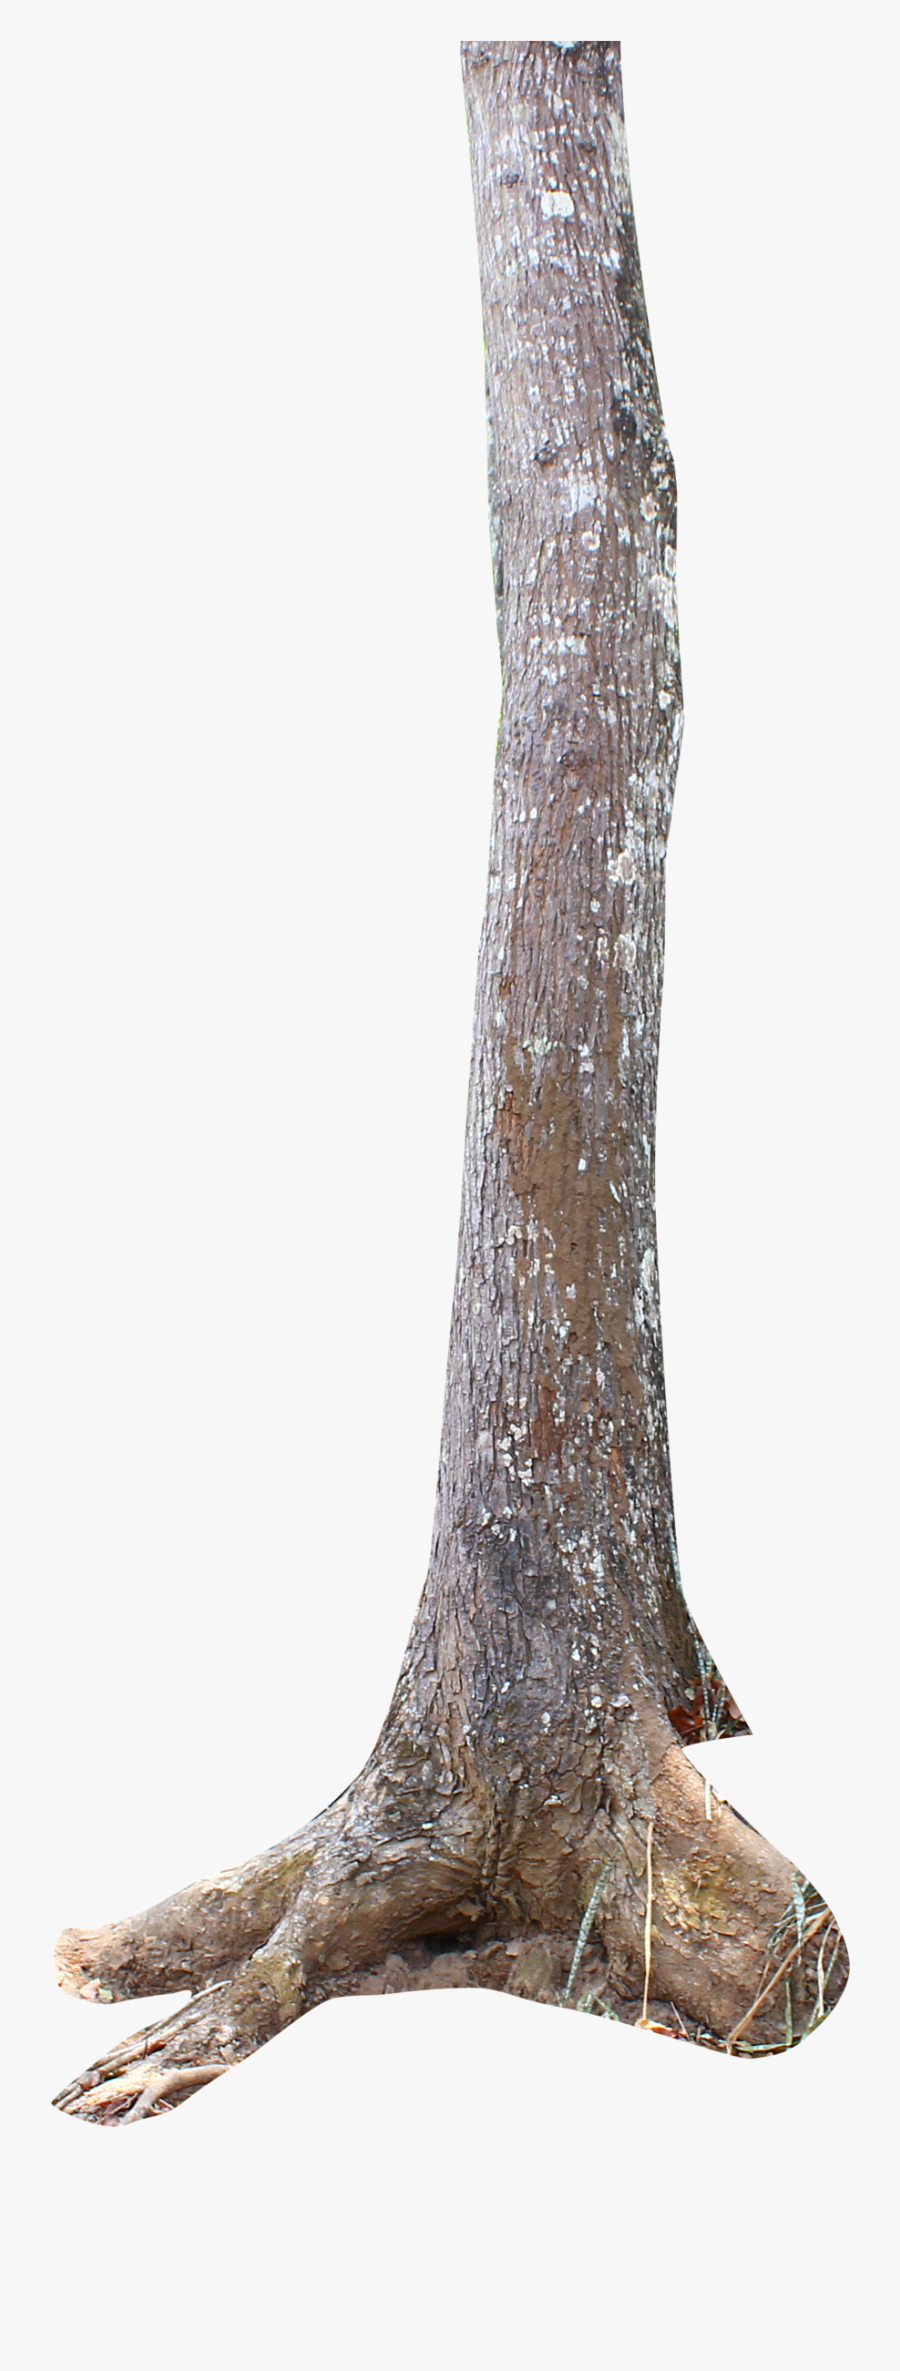 Tree Trunk Png, Transparent Clipart